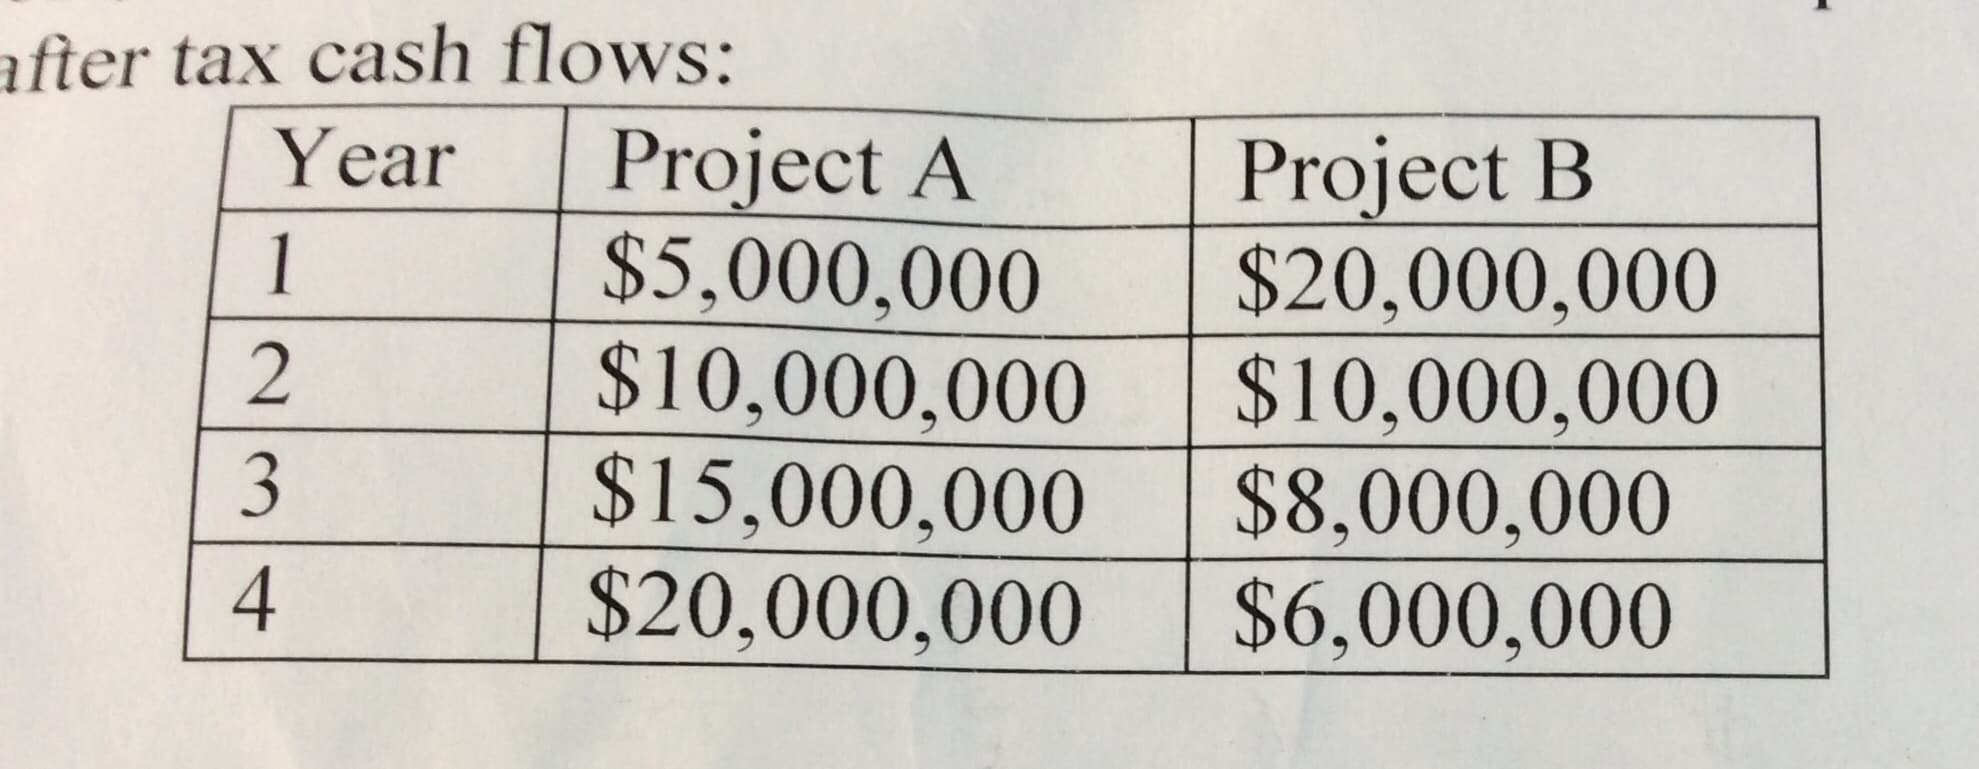 after tax cash flows:
Year
Project A
$5,000,000
$10,000,000
$15,000,000
$20,000,000
Project B
$20,000,000
$10,000,000
$8,000,000
$6,000,000
1
2
3
4
